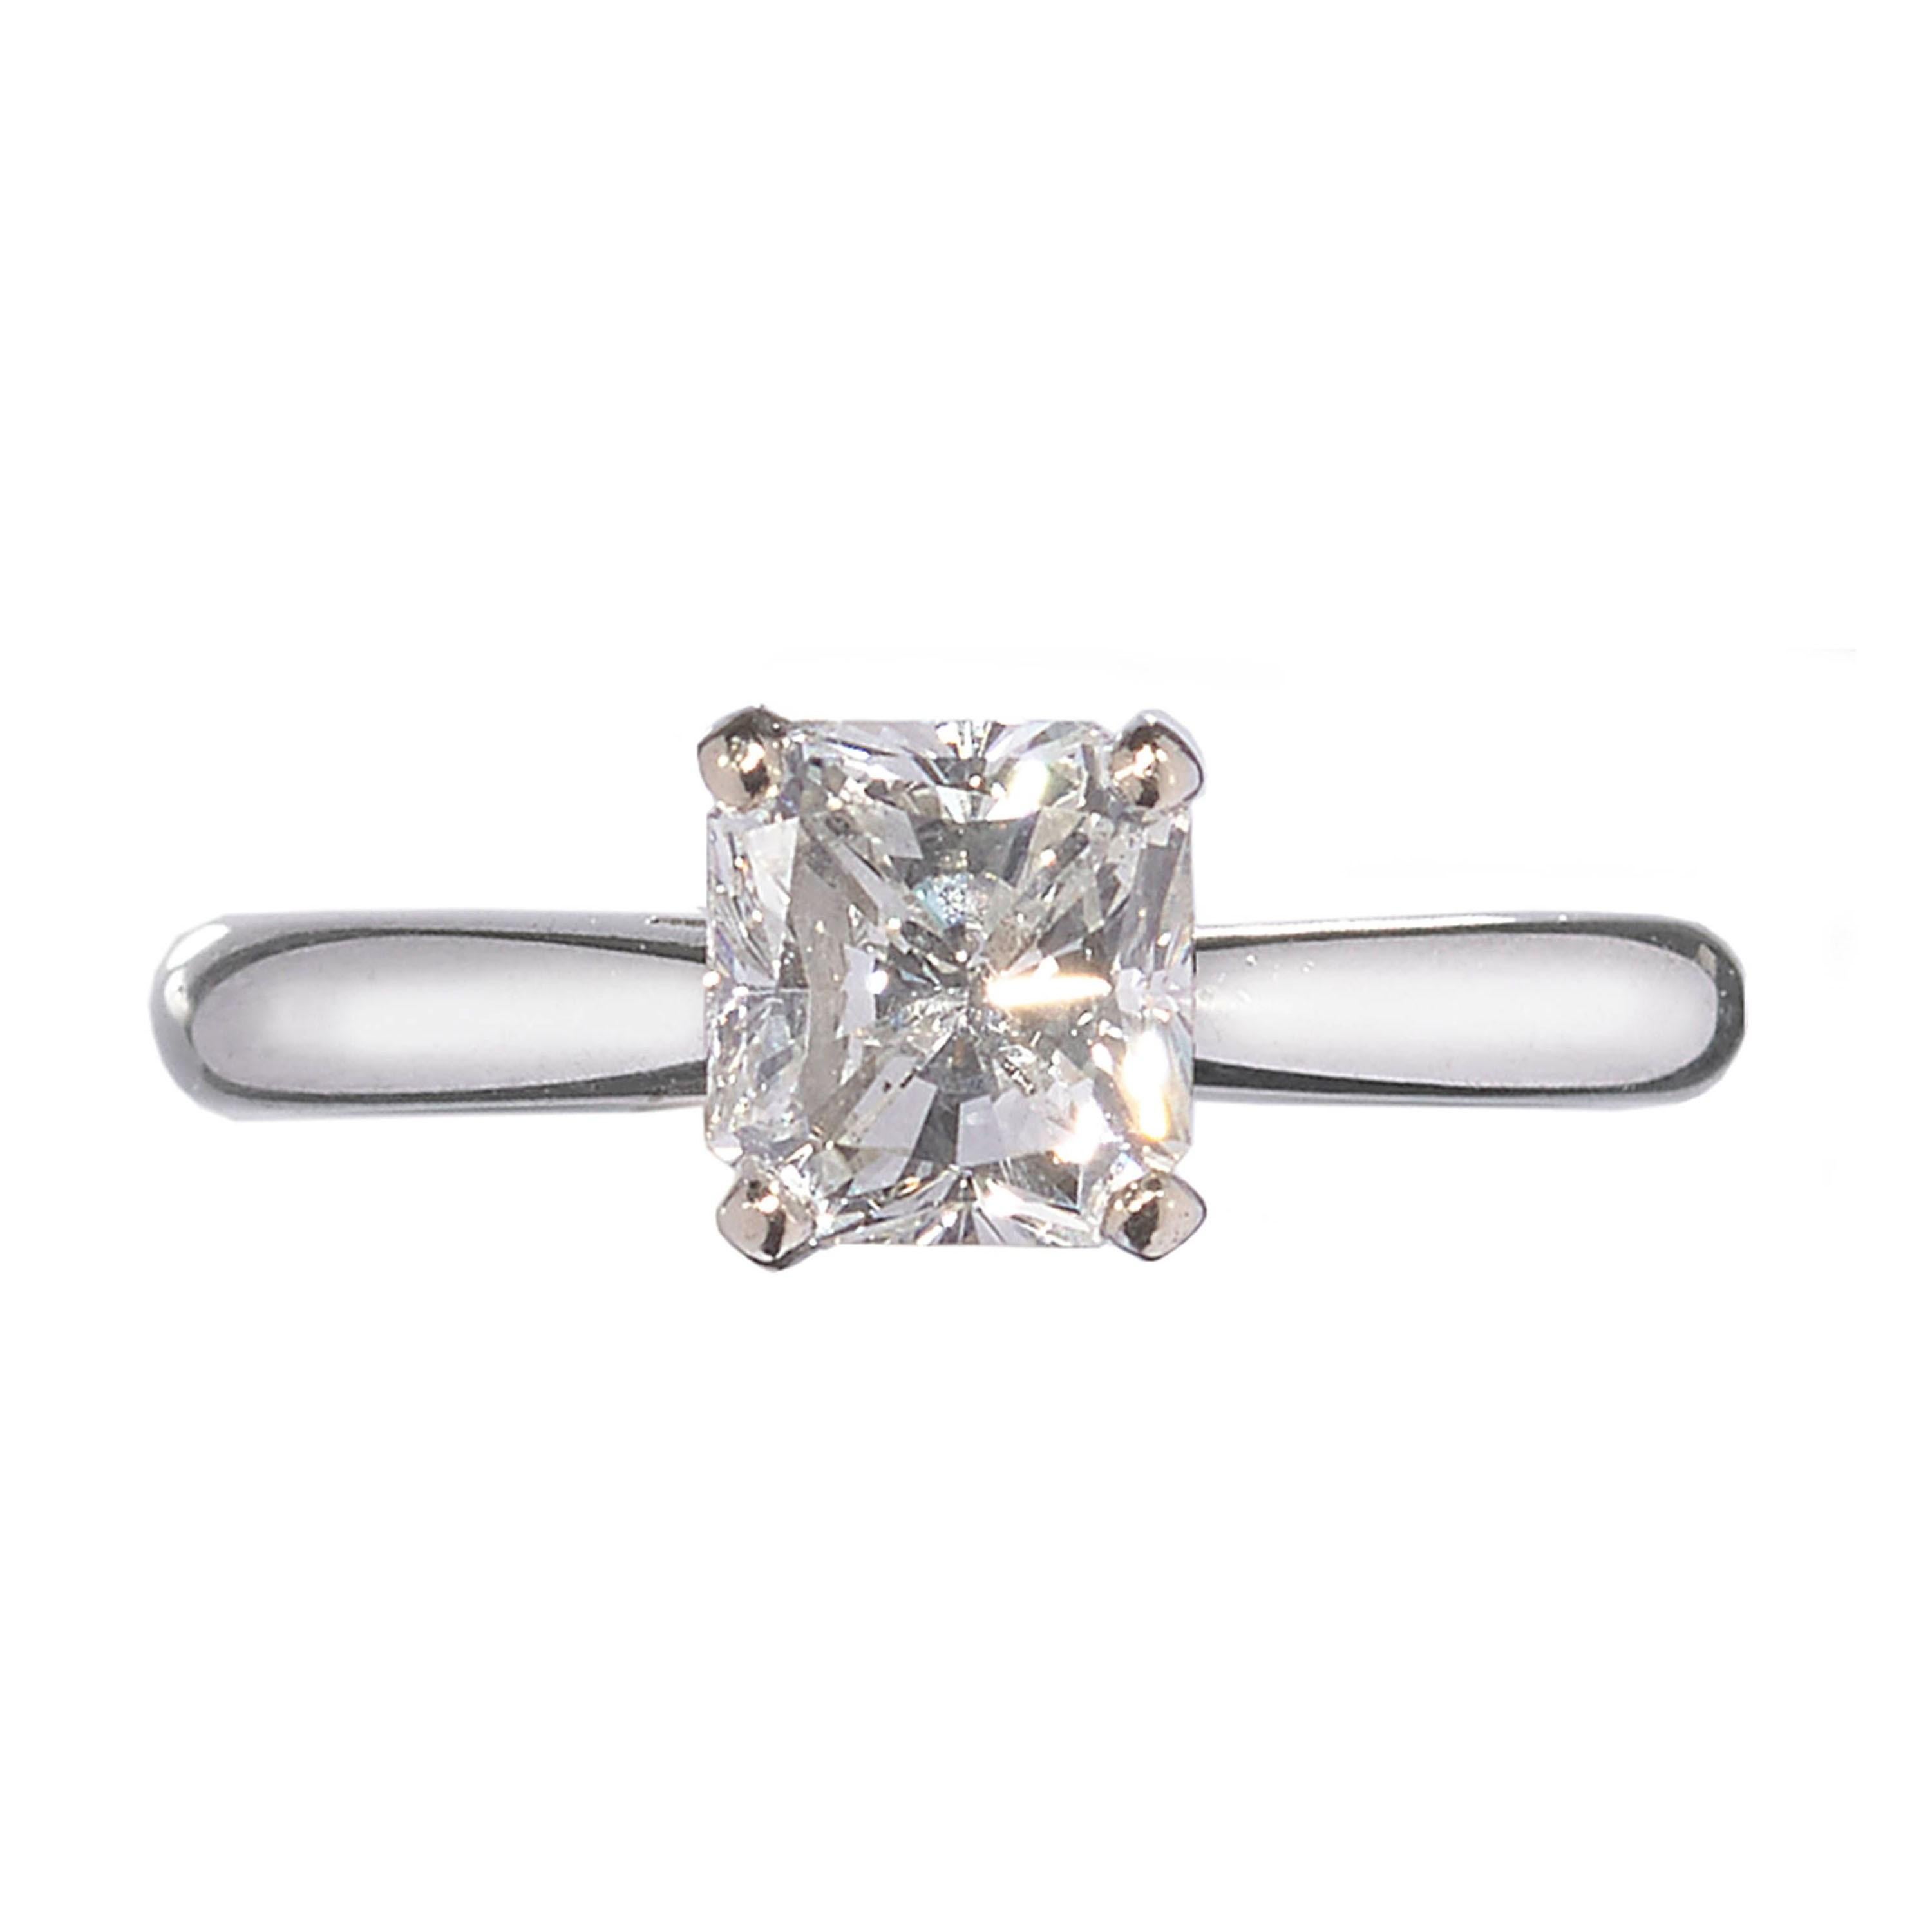 A single stone diamond ring, with a 1.01ct, H colour, SI1 clarity radiant-cut diamond, in a four claw setting, mounted in platinum, accompanied by an EGL certificate.